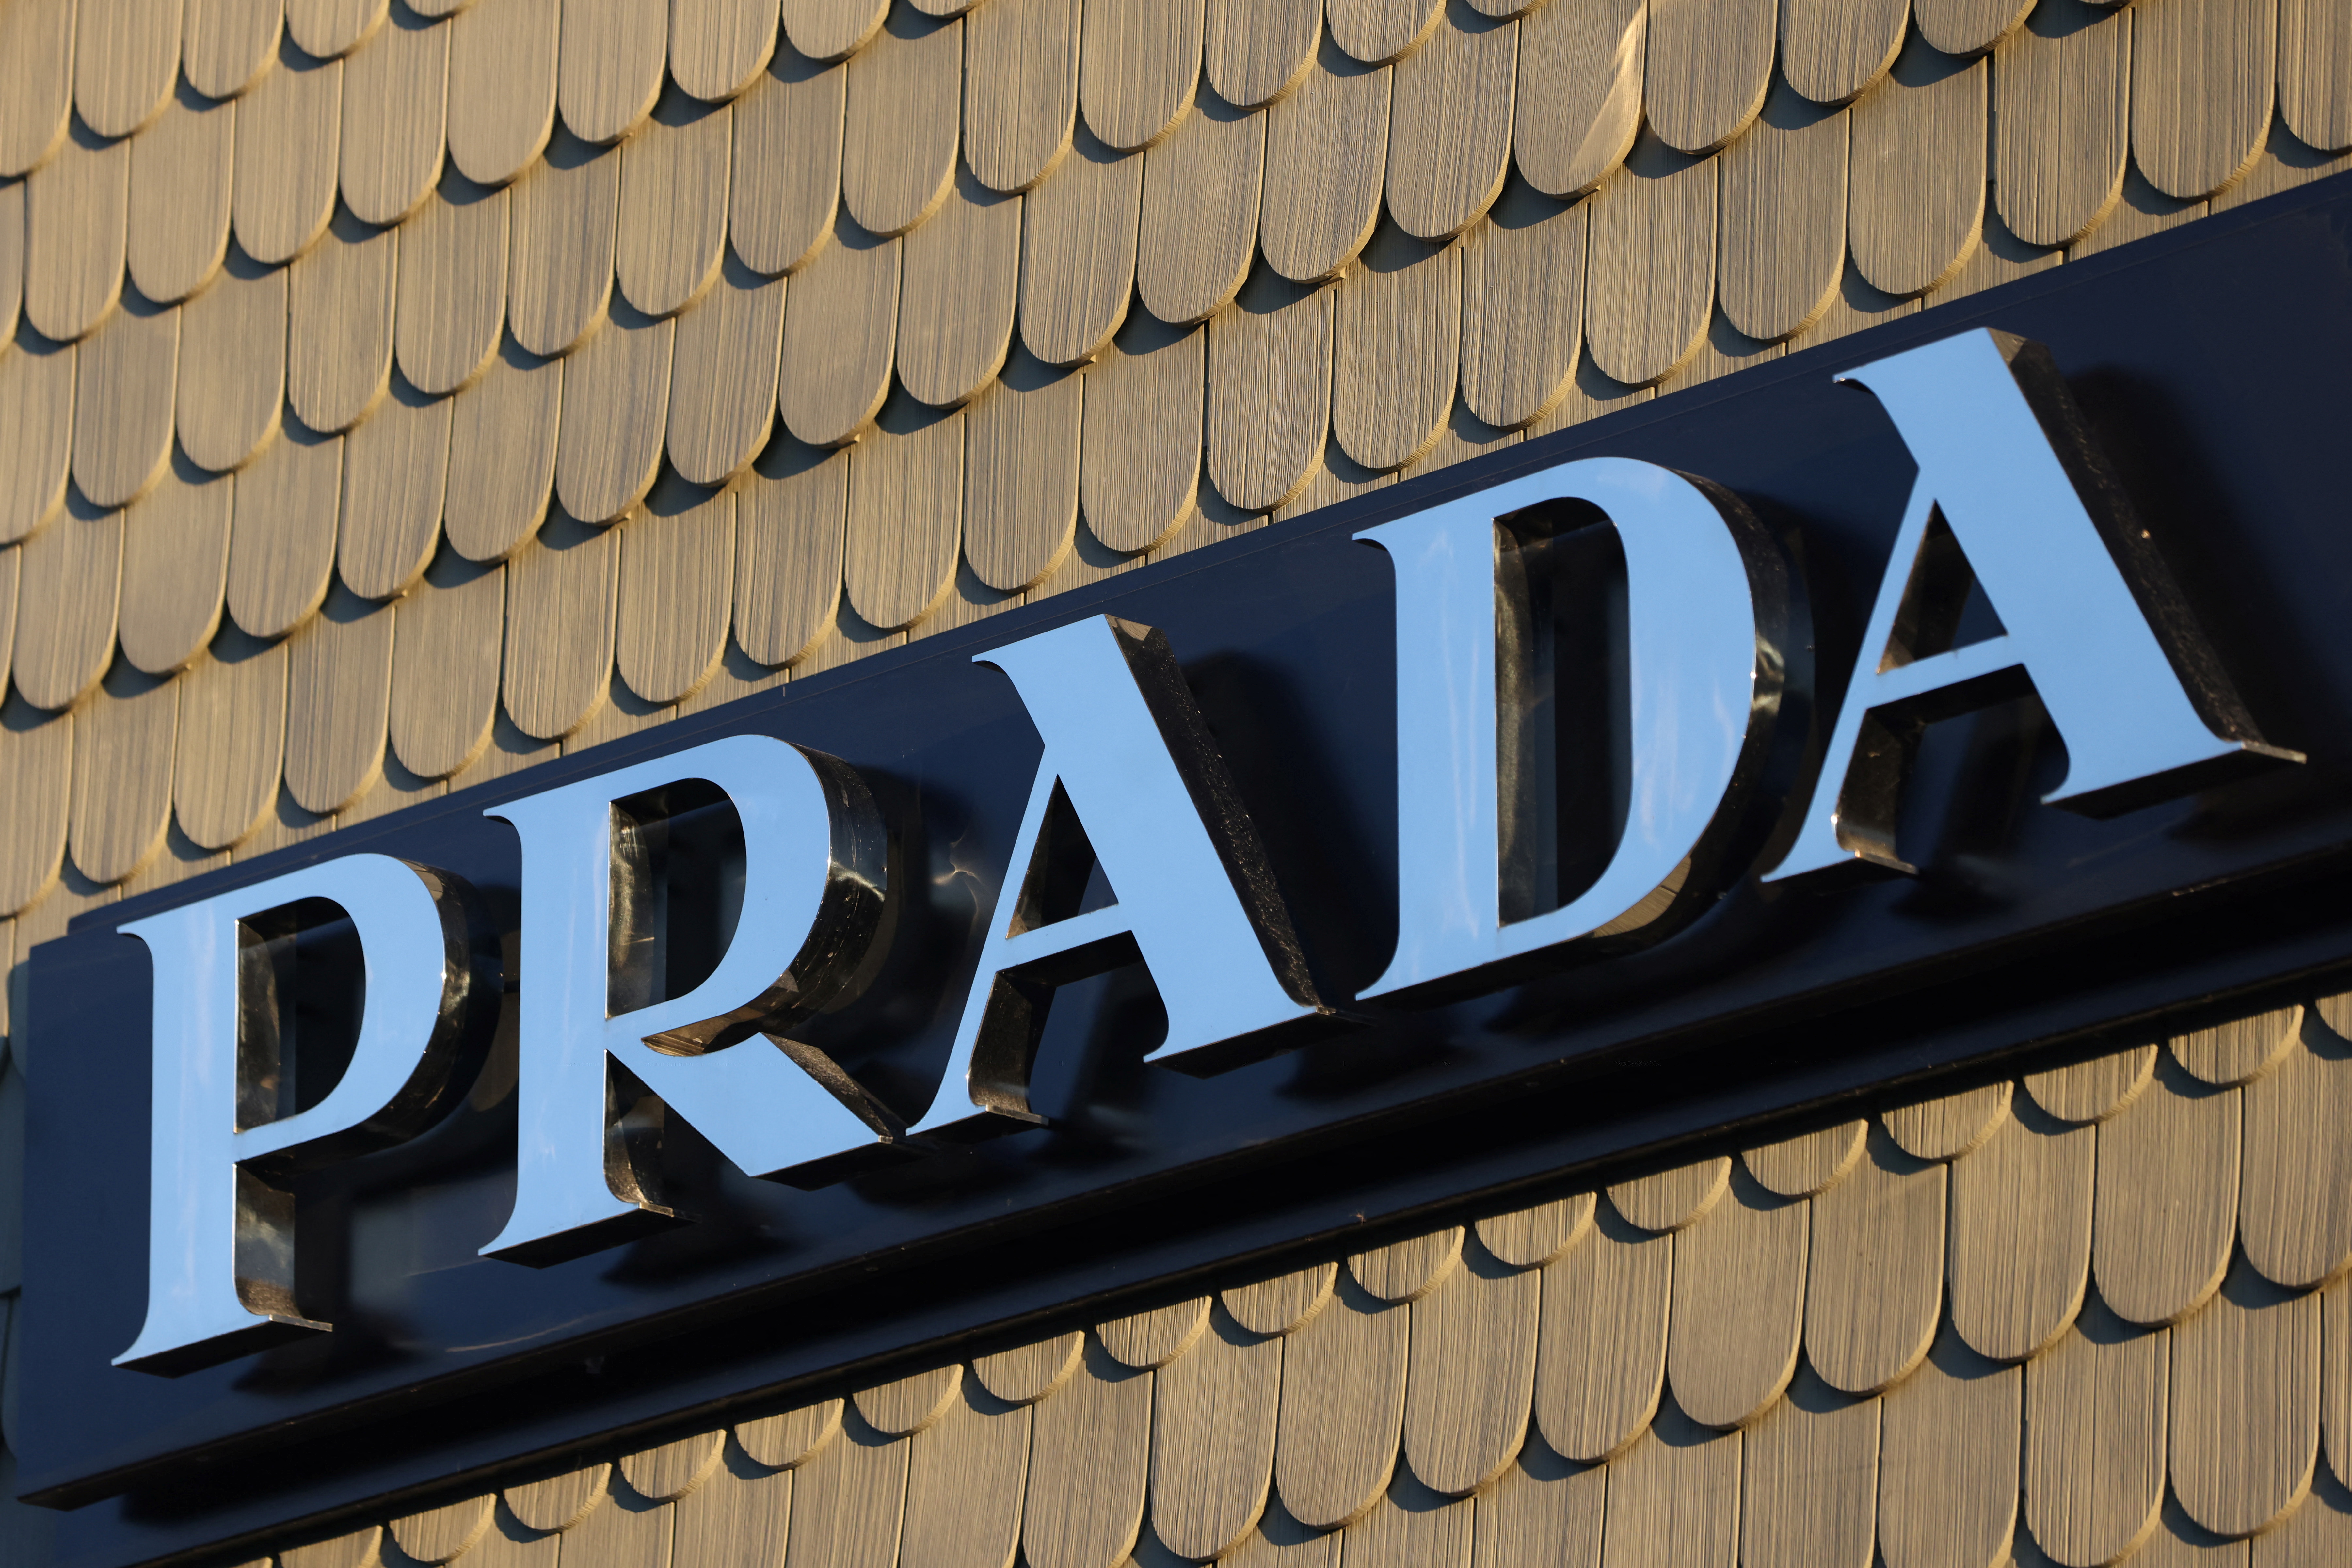 Prada confirms targets after 'strong start' to 2022 | Reuters